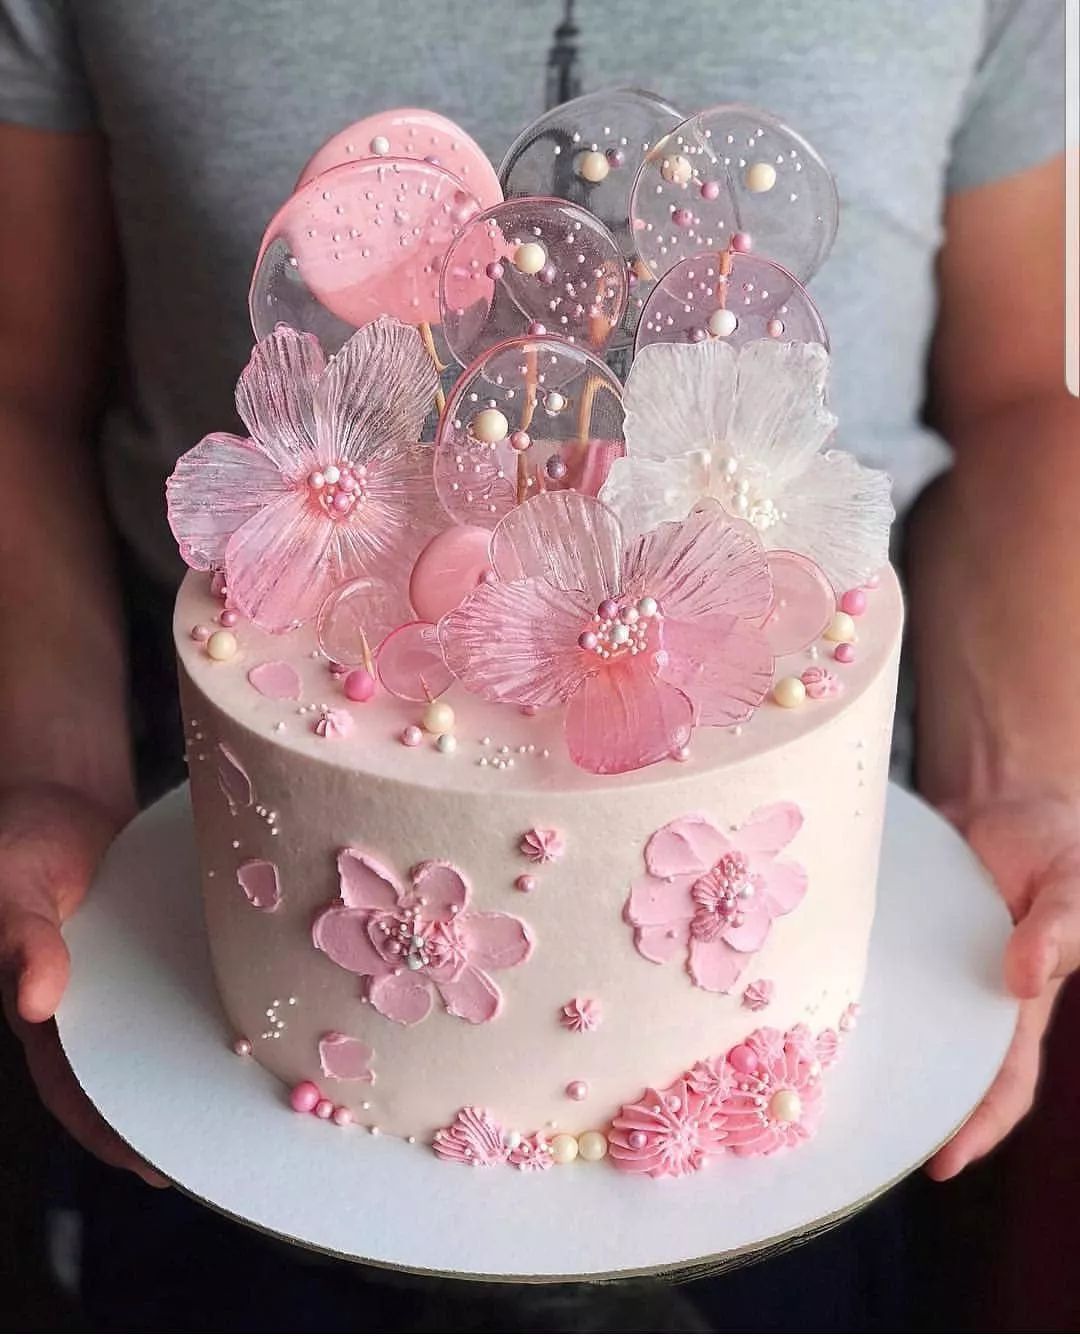 Meenu ka Kitchen - https://youtu.be/YdSTJ5qf8SI  👆🏻👆🏻👆🏻👆🏻👆🏻👆🏻👆🏻👆🏻👆🏻👆🏻 Anniversary/Birthday cake  decoration Wishing to make a beautiful cake for your birthday/anniversary?  which is also easy to design as well as easy to make? well you're